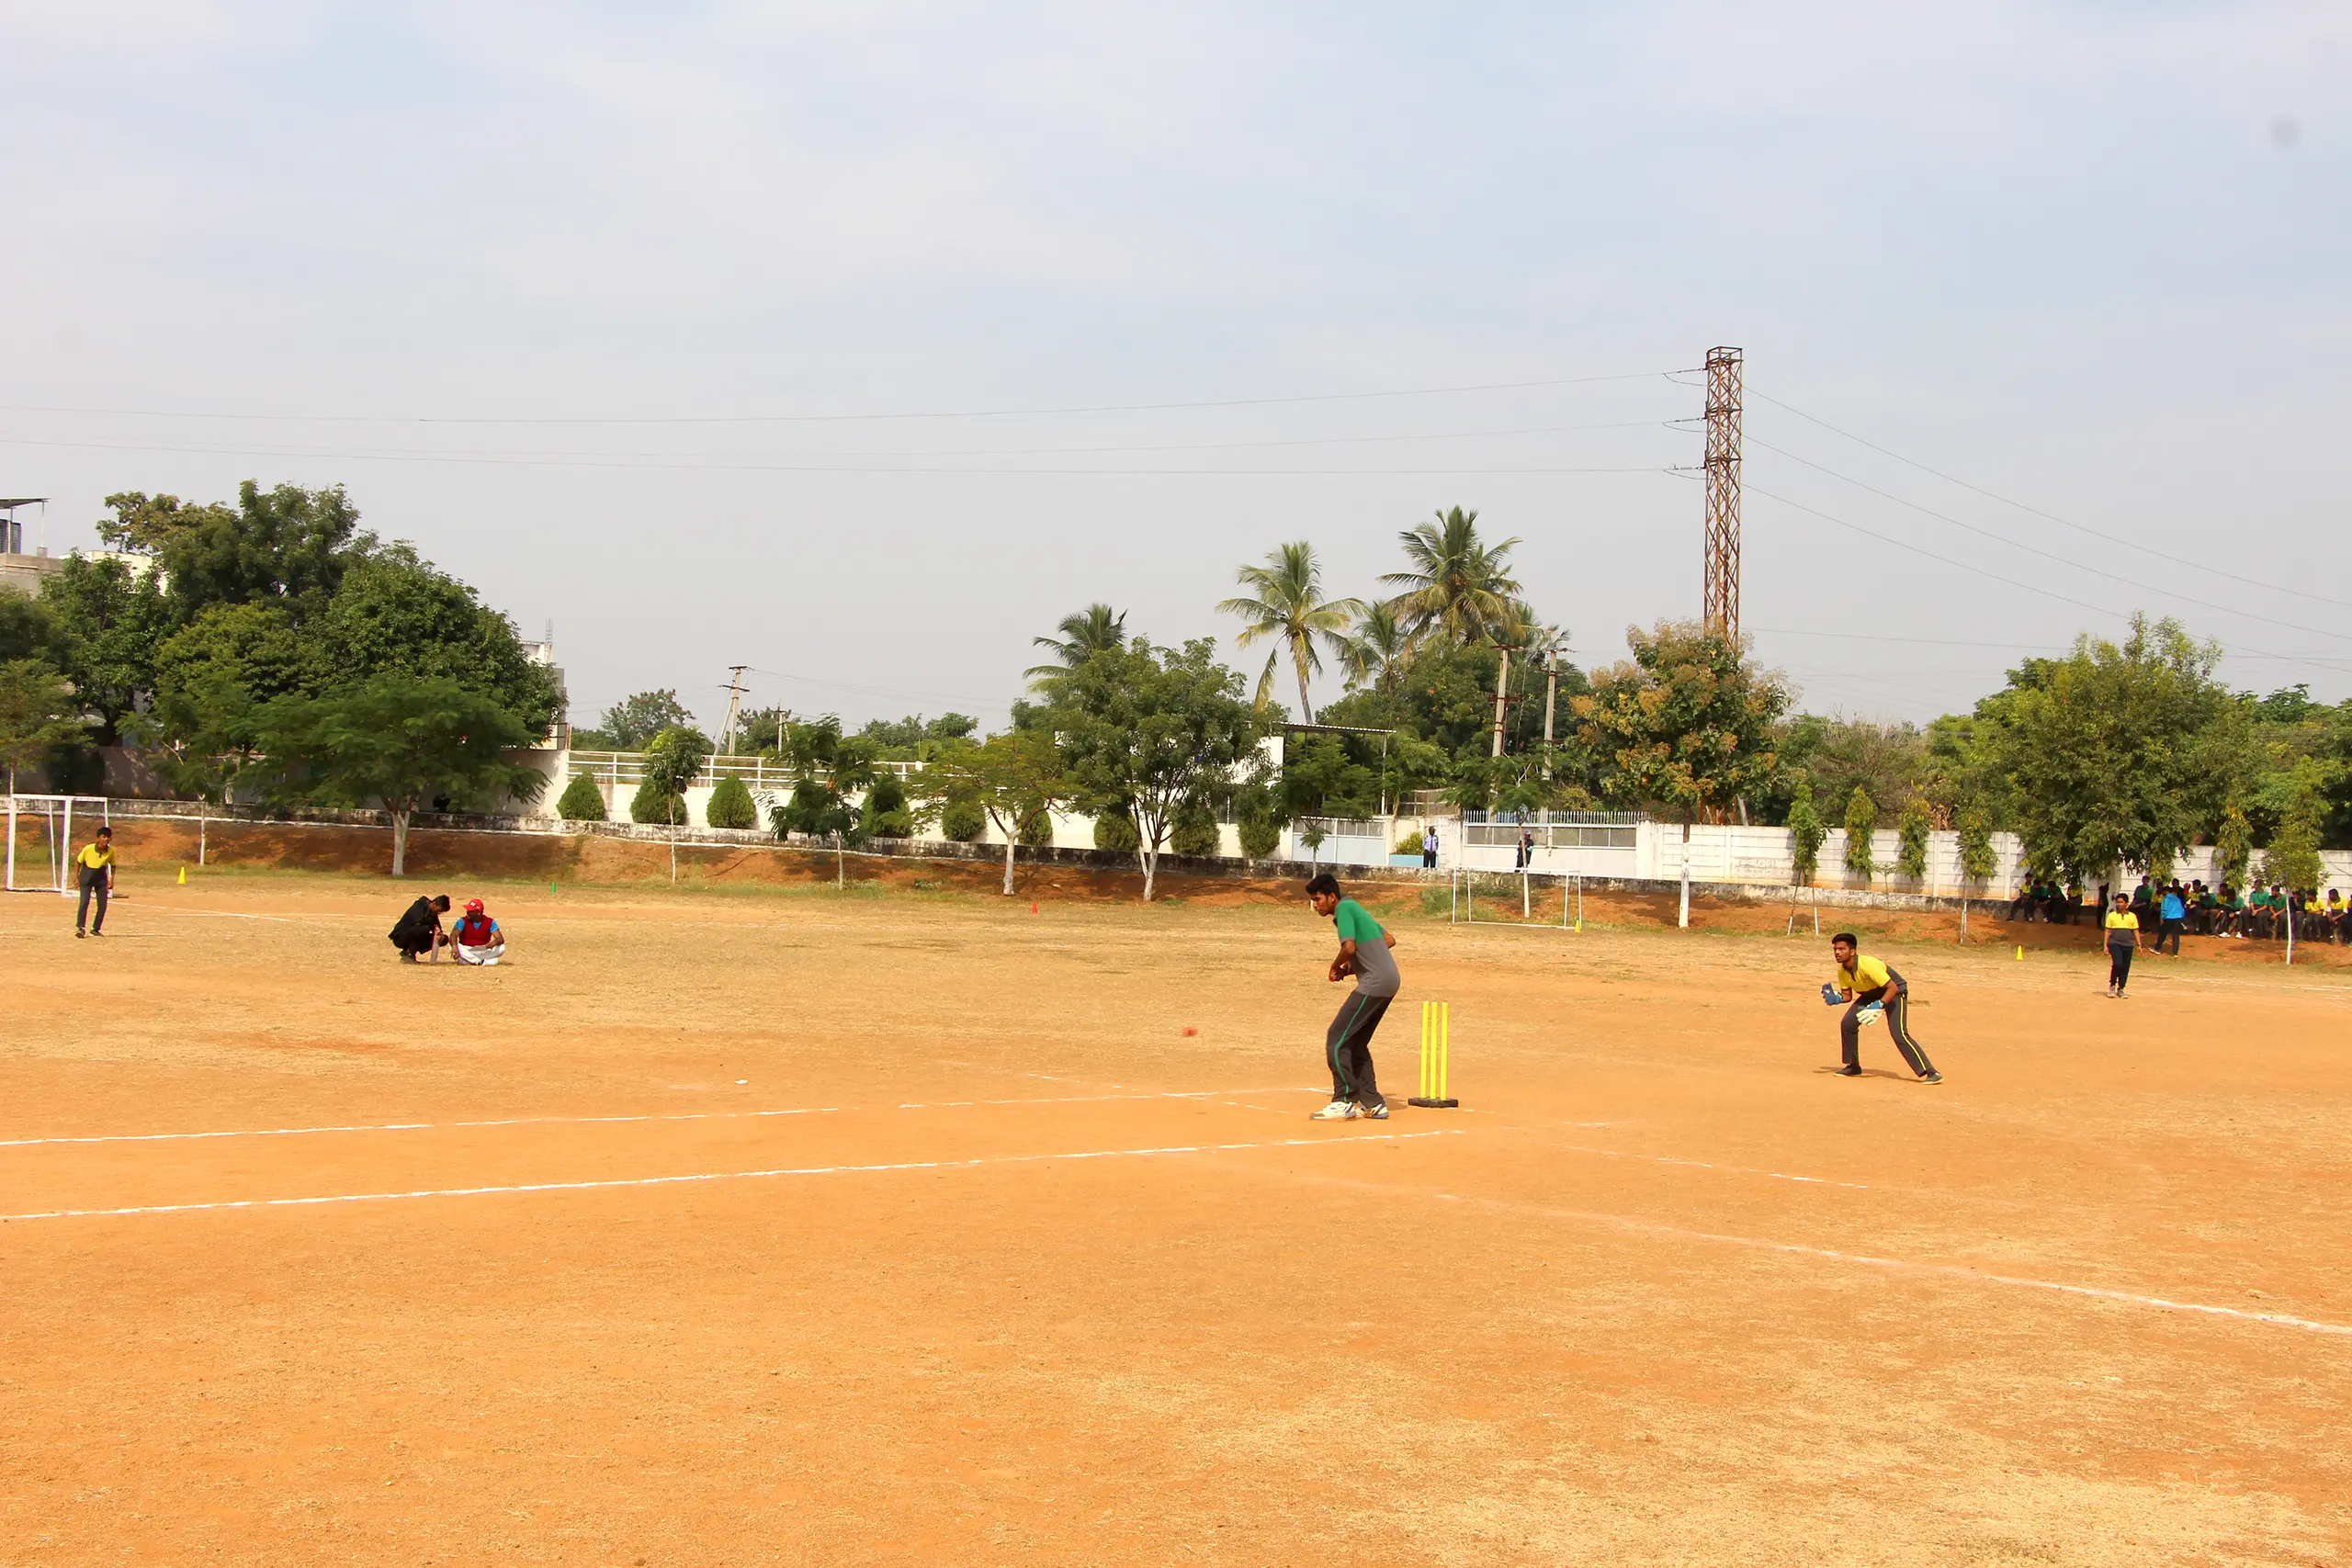 Students playing cricket on the ground at DPS Warangal.